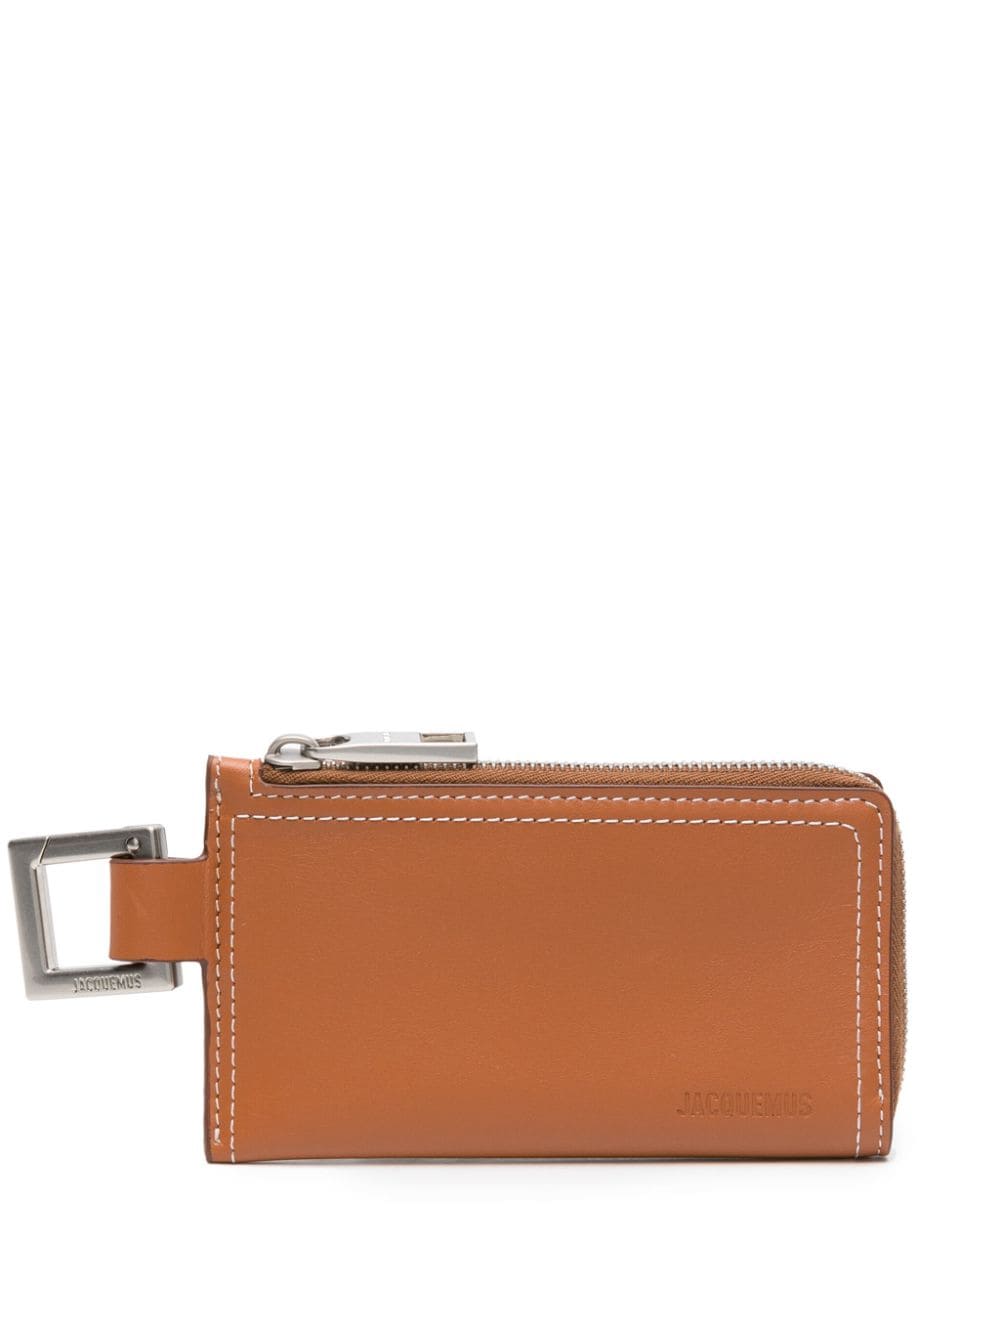 Jacquemus Le Porte Leather Wallet In Brown